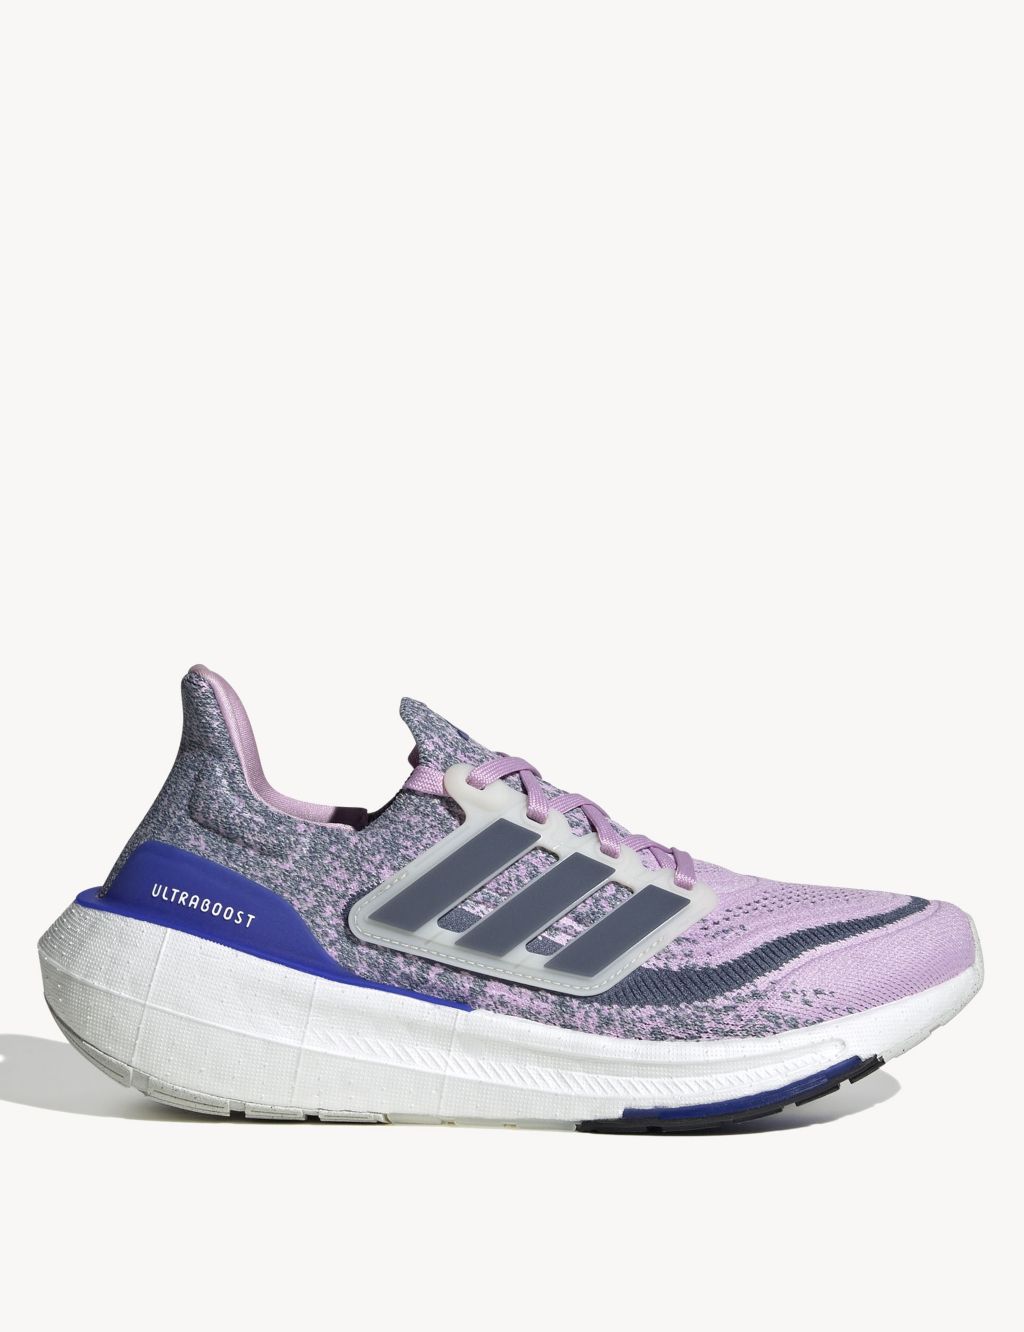 Ultraboost 23 Trainers image 1